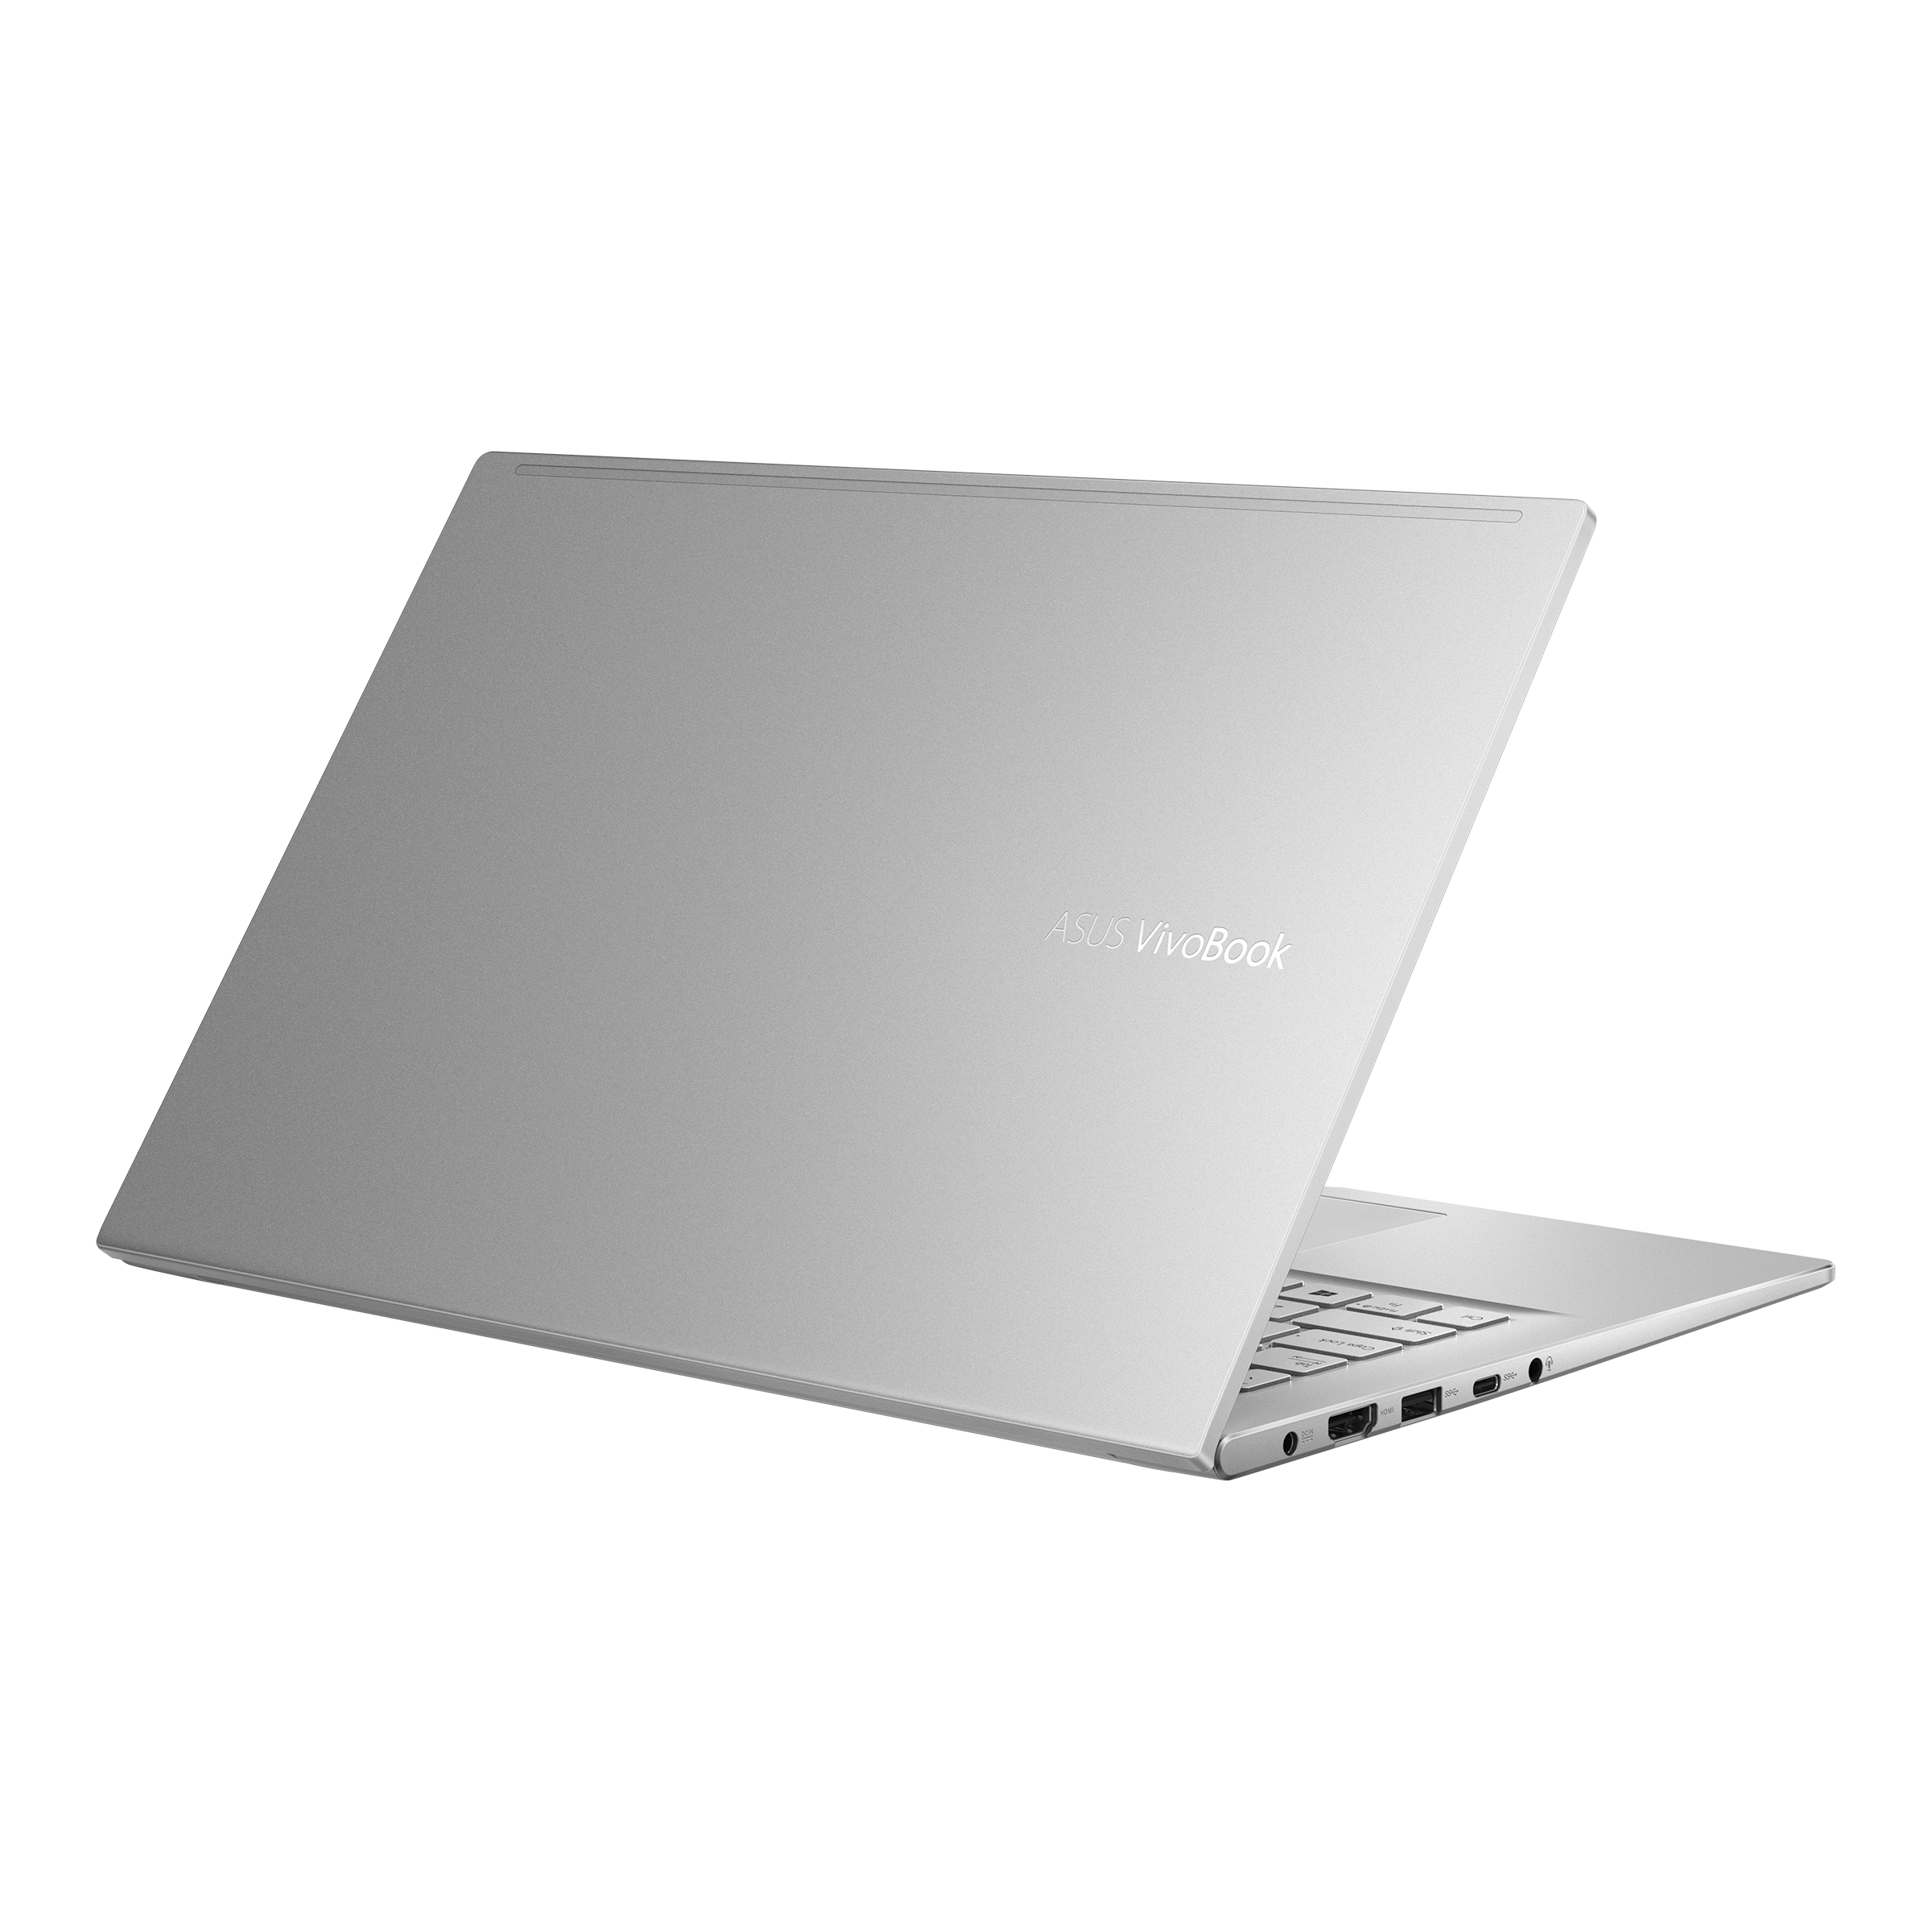 Vivobook 14 M413｜Laptops For Students｜ASUS USA